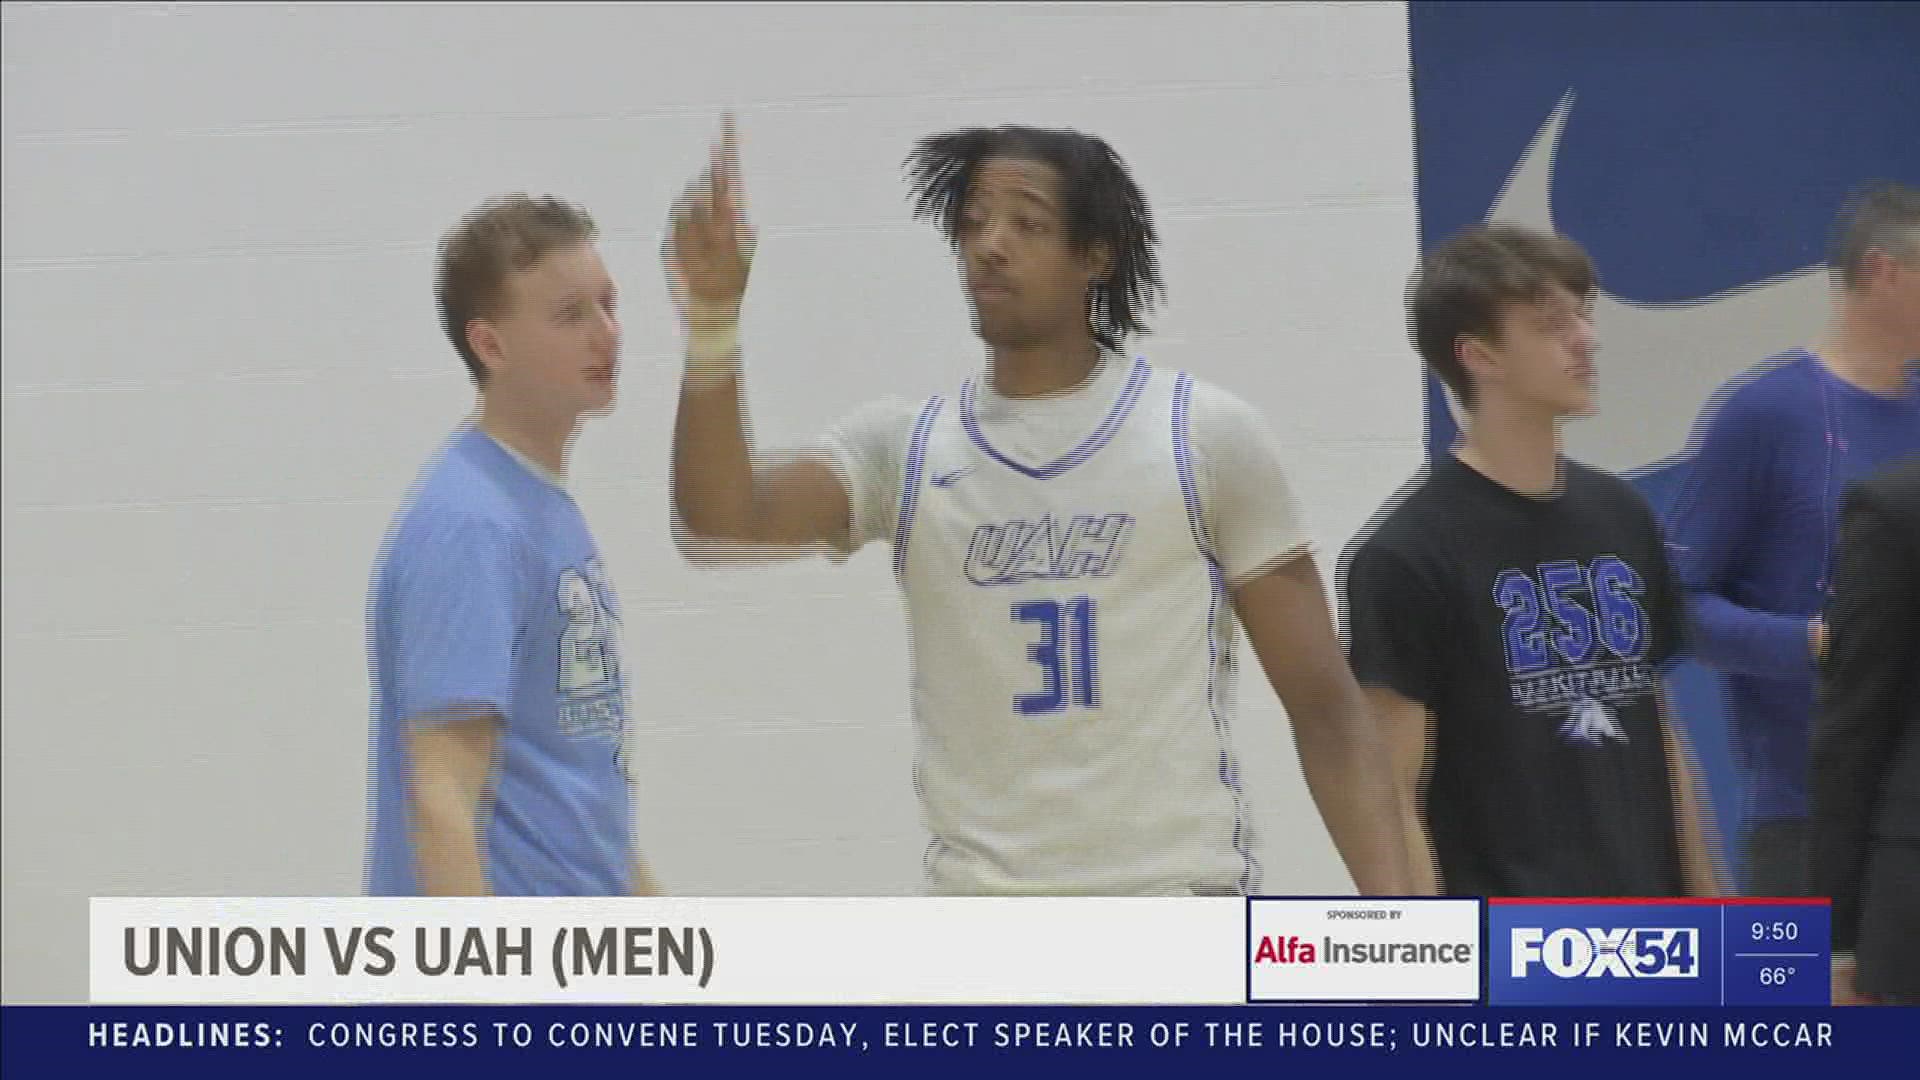 The UAH men's basketball team claimed a 76-74 victory over Union. The Charger women dropped Monday's home matchup to No. 19 Union by a final score of 85-47